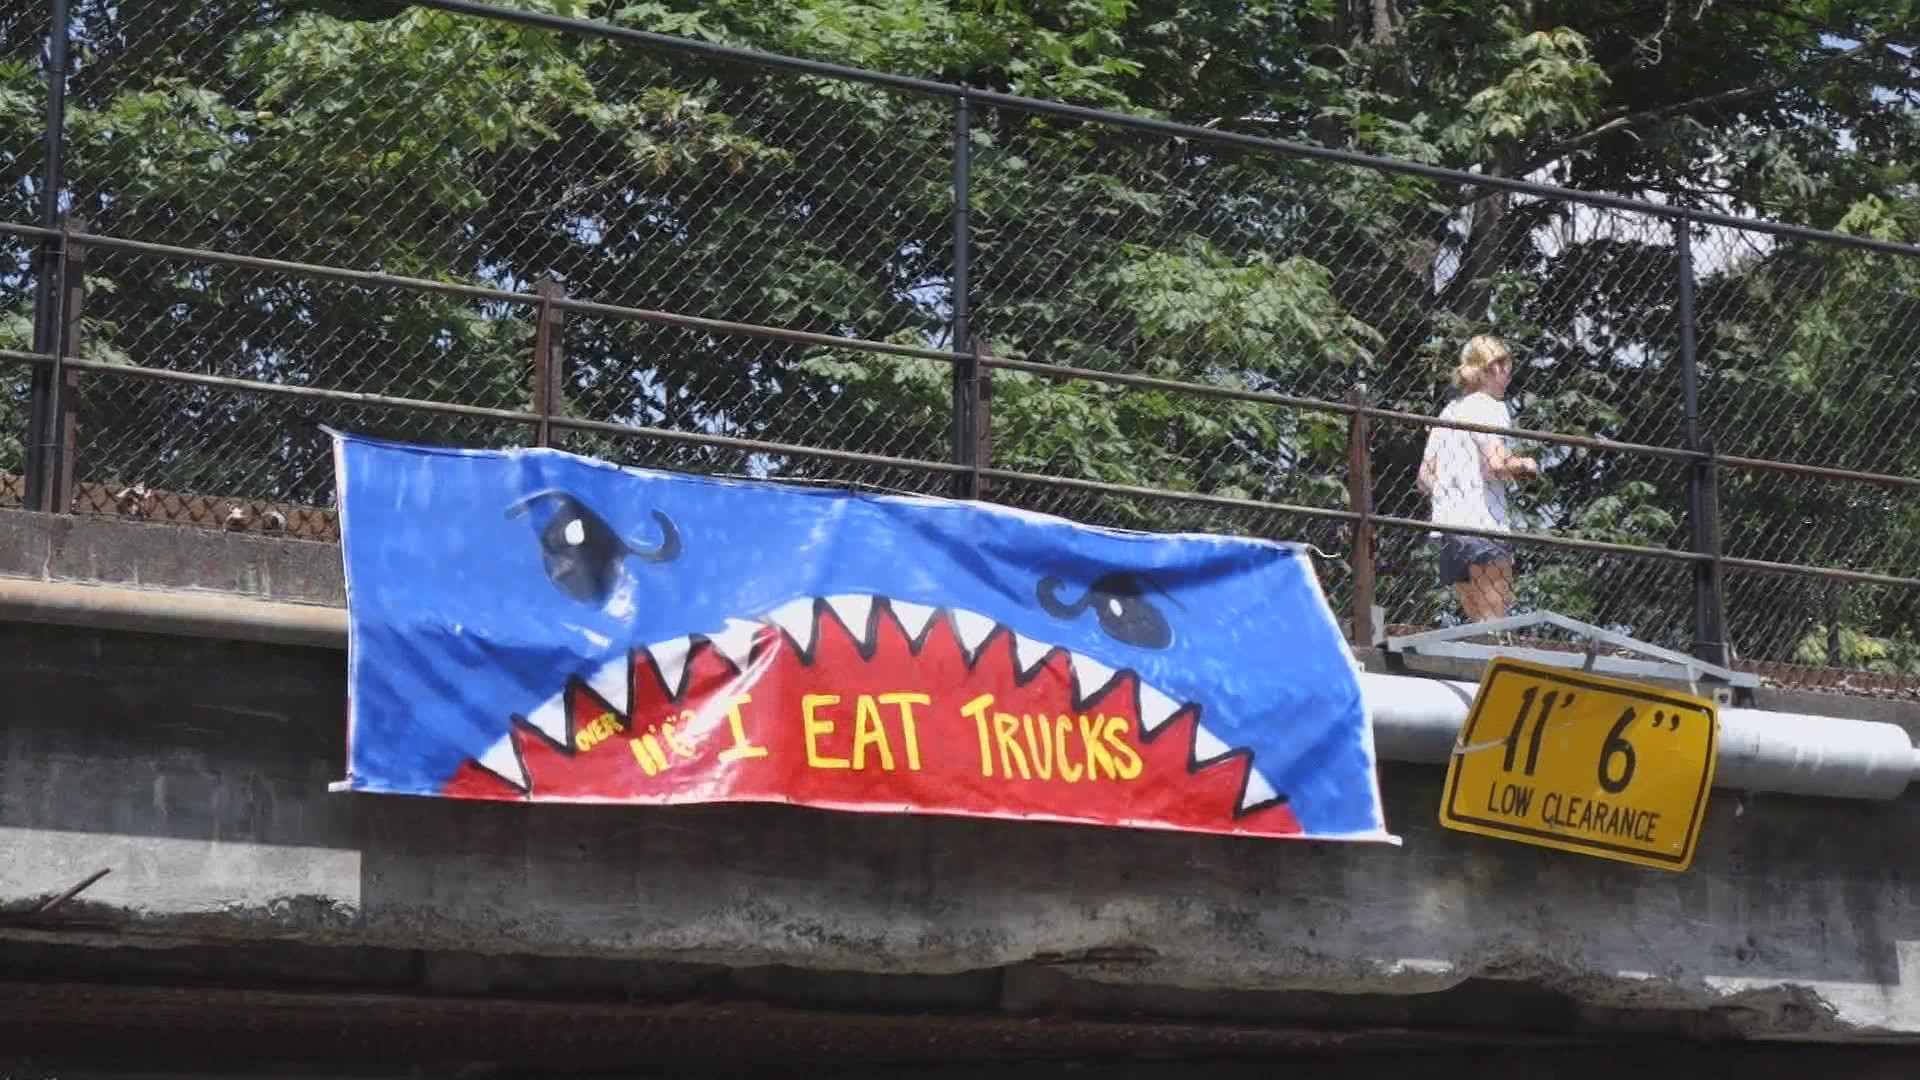 A Kirkland resident hung a banner on one side of the bridge with a picture of a shark saying "I eat trucks." The bridge is listed as "Truckbane" on Google Maps.